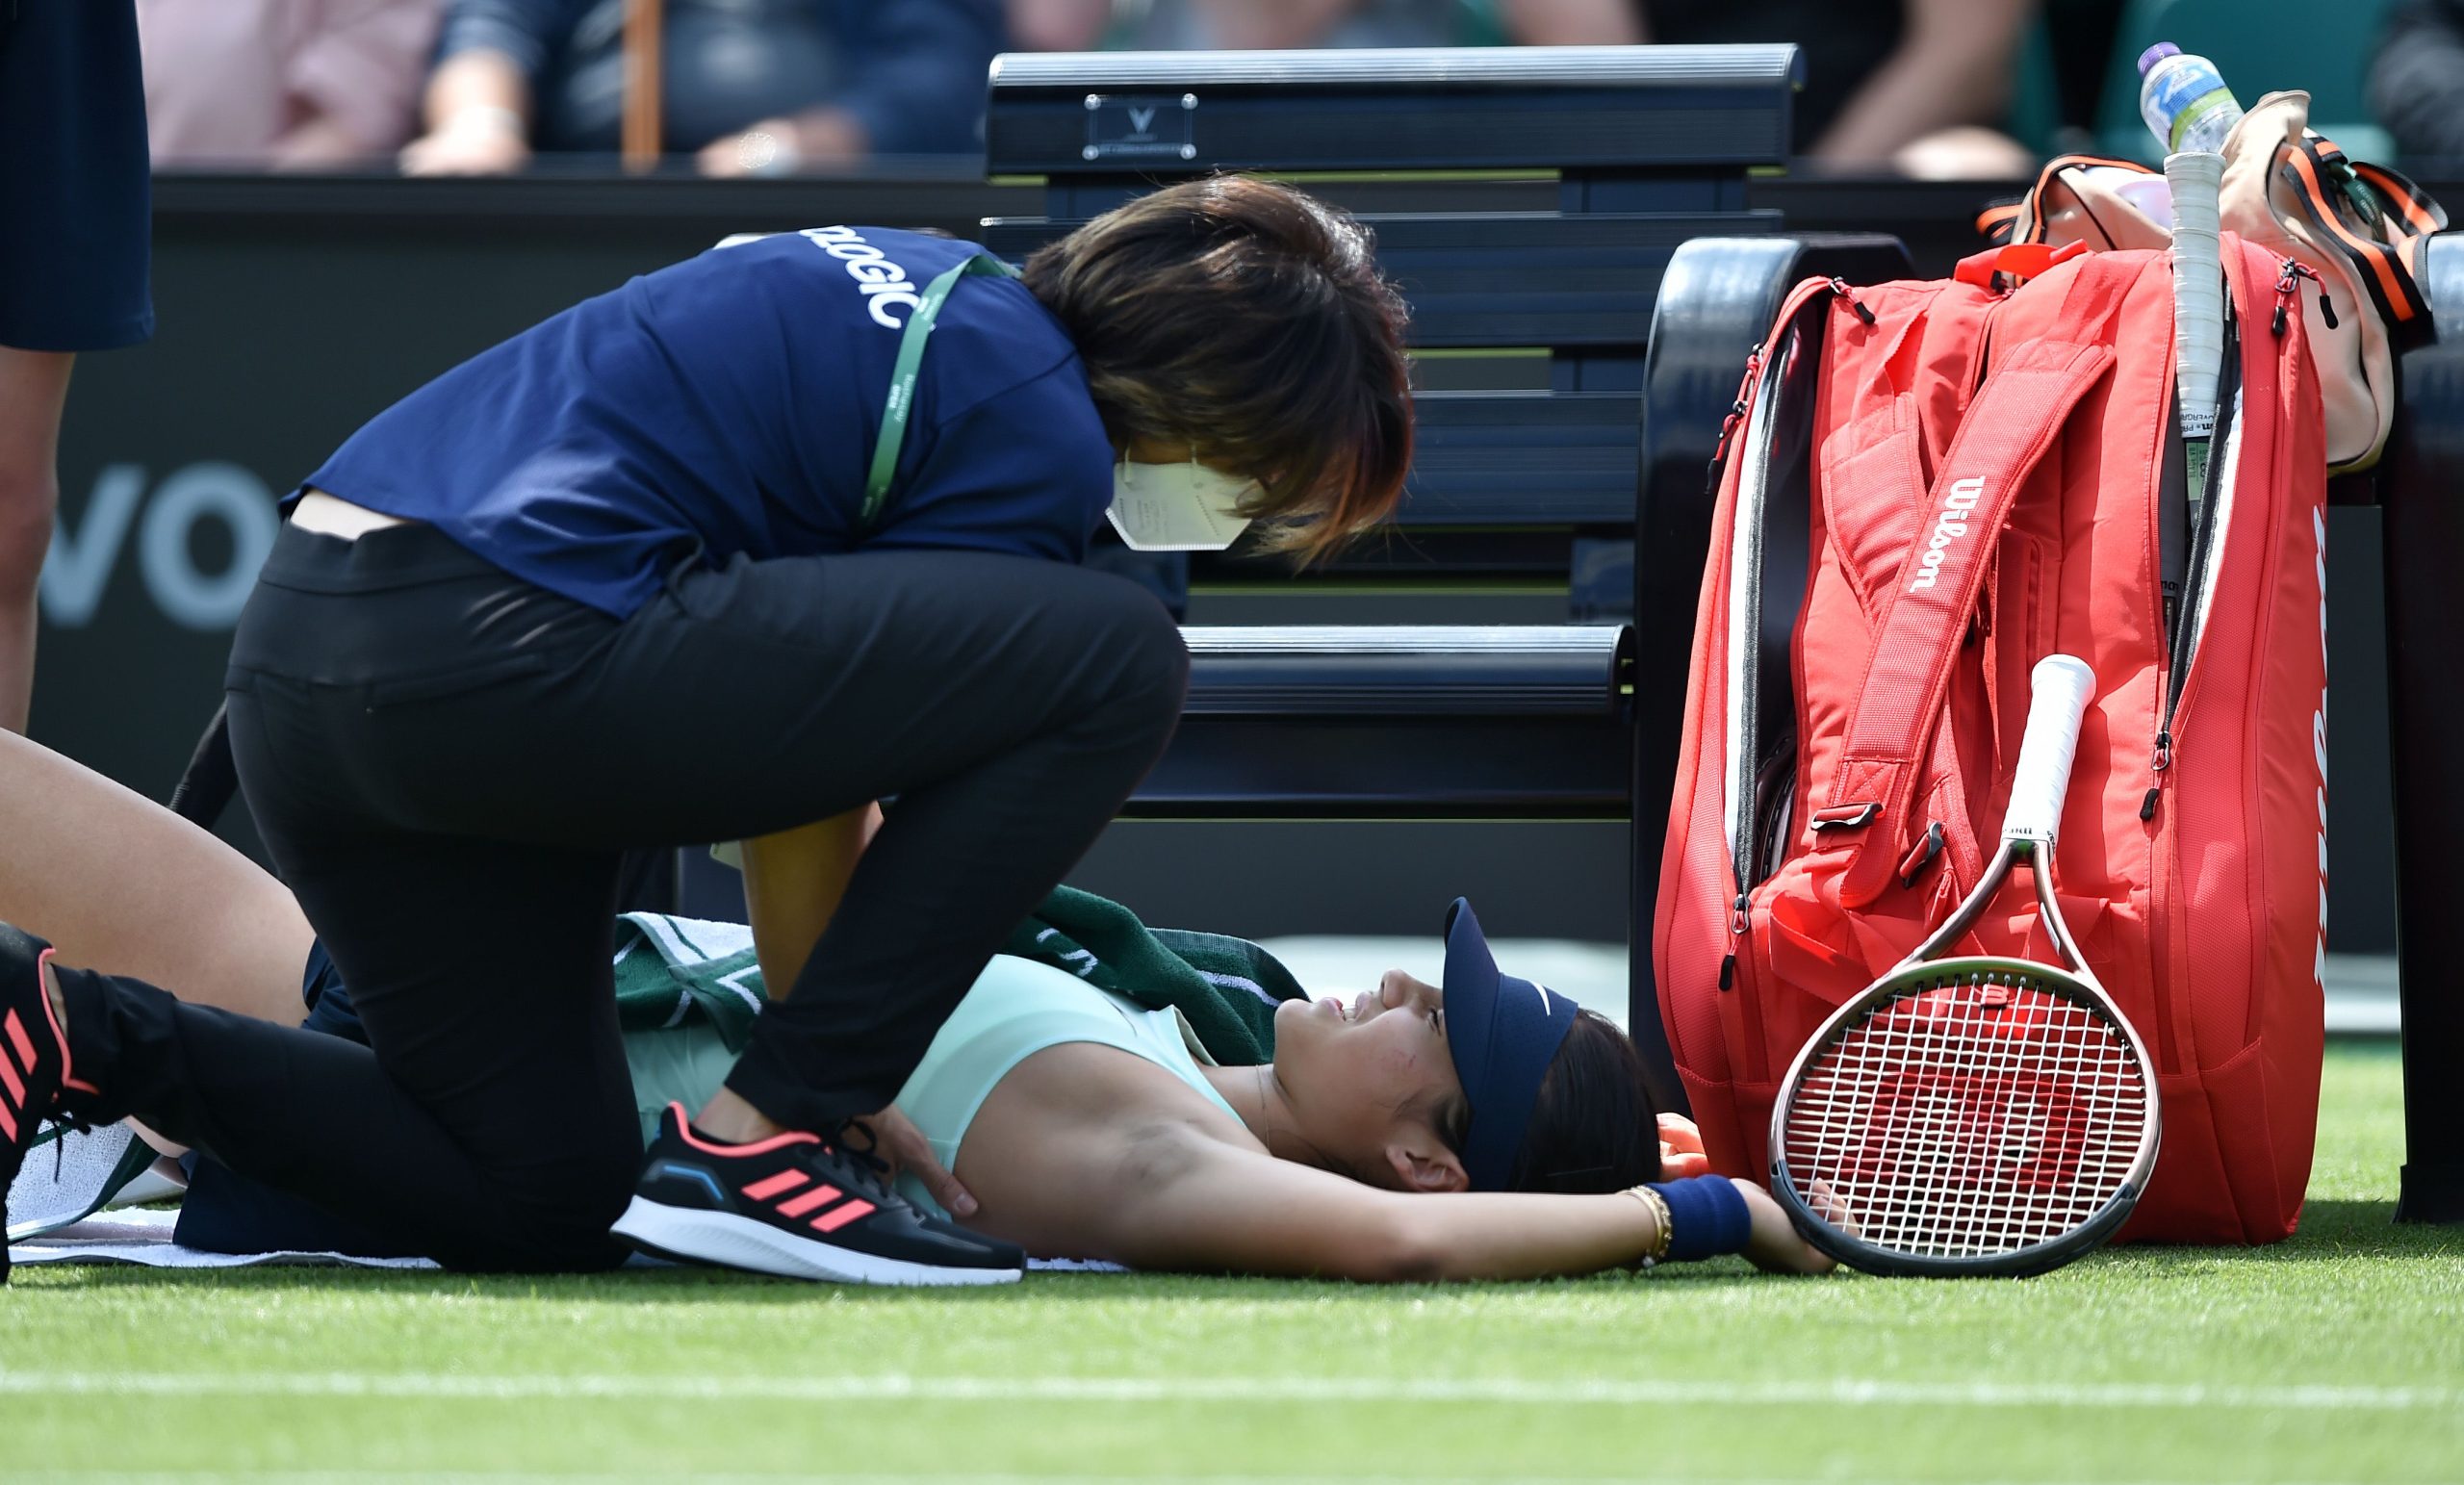 DEVASTATED INJURY: Tennis super star player has sustain a very bad injury l don’t no if he could play ag…..see more….